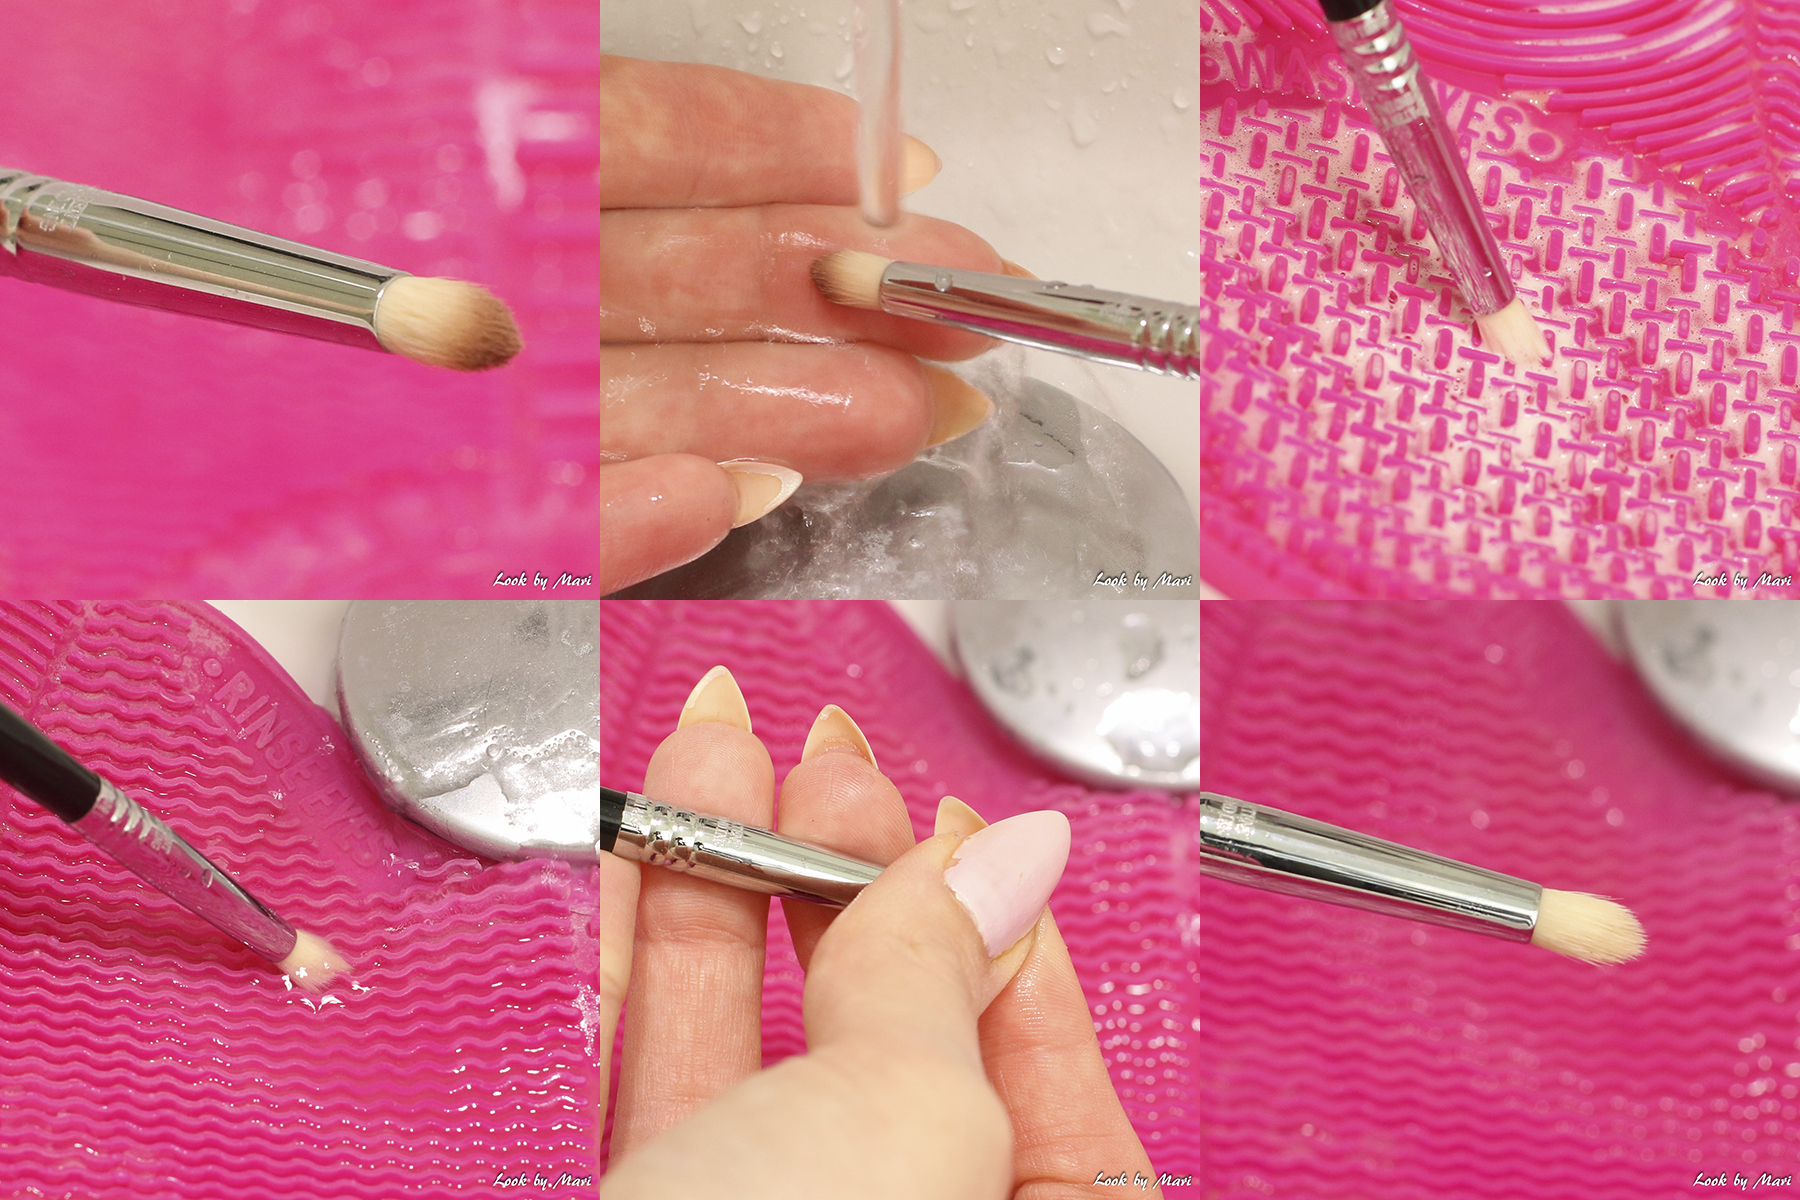 16 eleven.fi sigma beauty spa brush cleaning mat review price worth it how to use